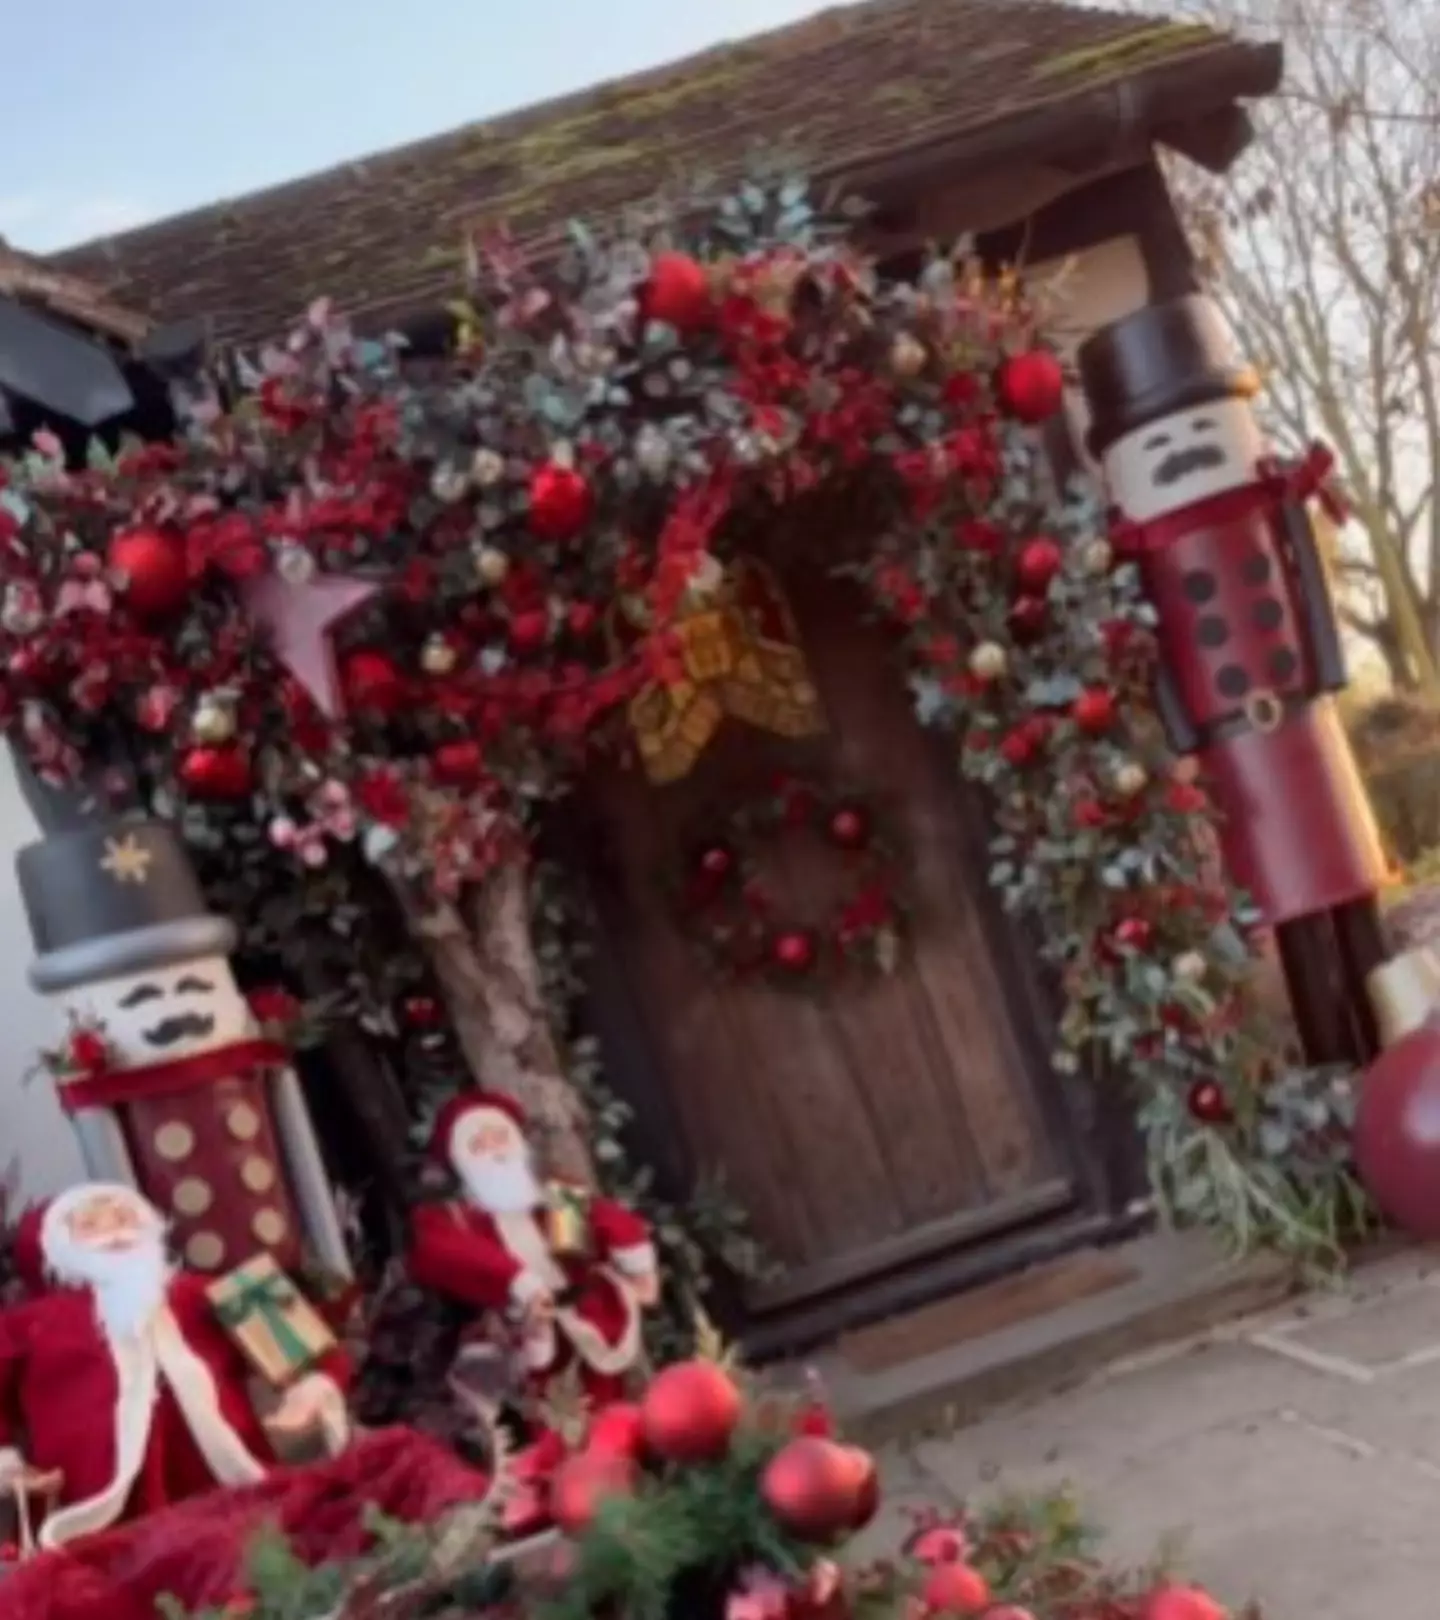 Stacey Solomon's house was a full blown Christmas extravaganza.